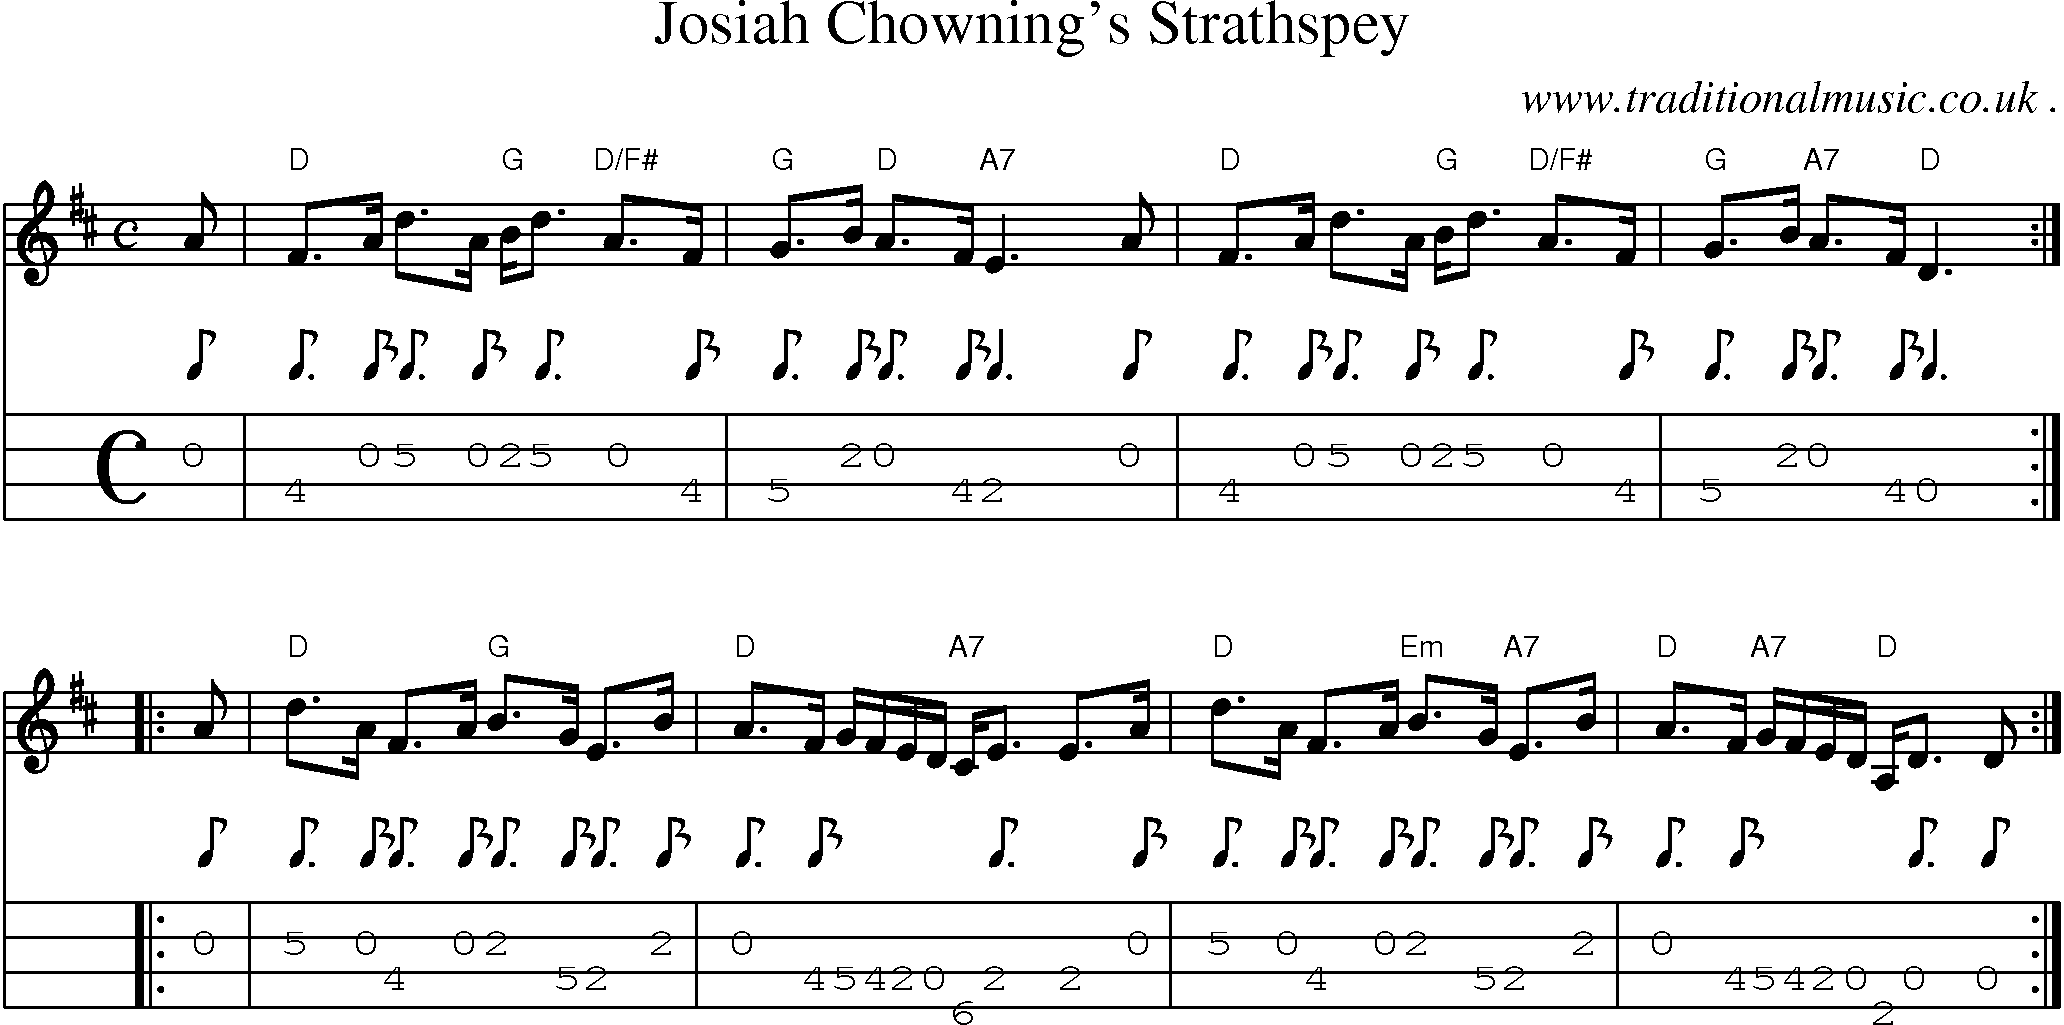 Sheet-music  score, Chords and Mandolin Tabs for Josiah Chownings Strathspey